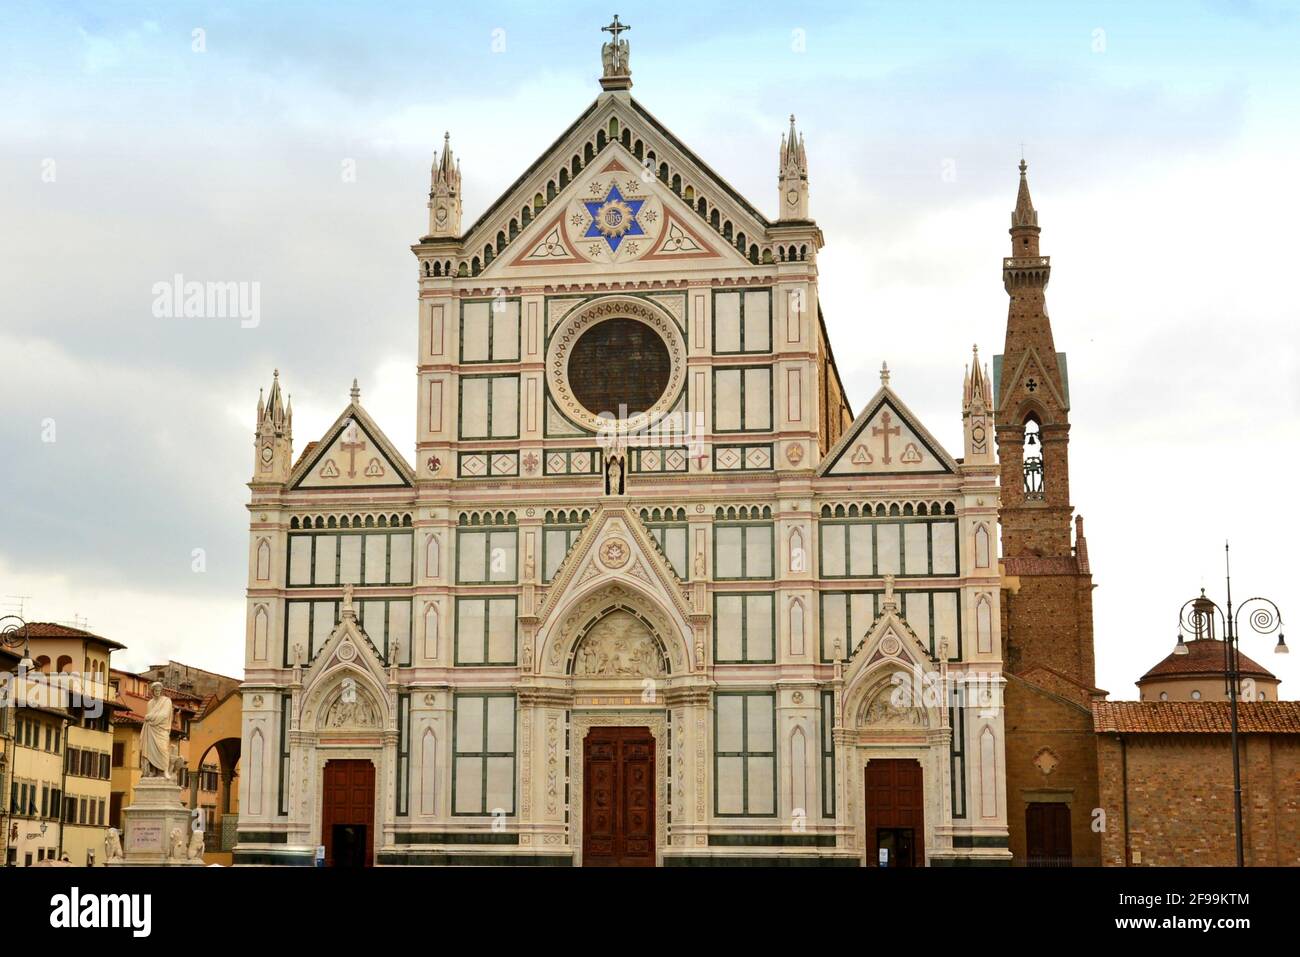 Italy, Florence, The Santa Croce church is a basilica built in the 13th century, it is the largest franciscan church in the world. Stock Photo